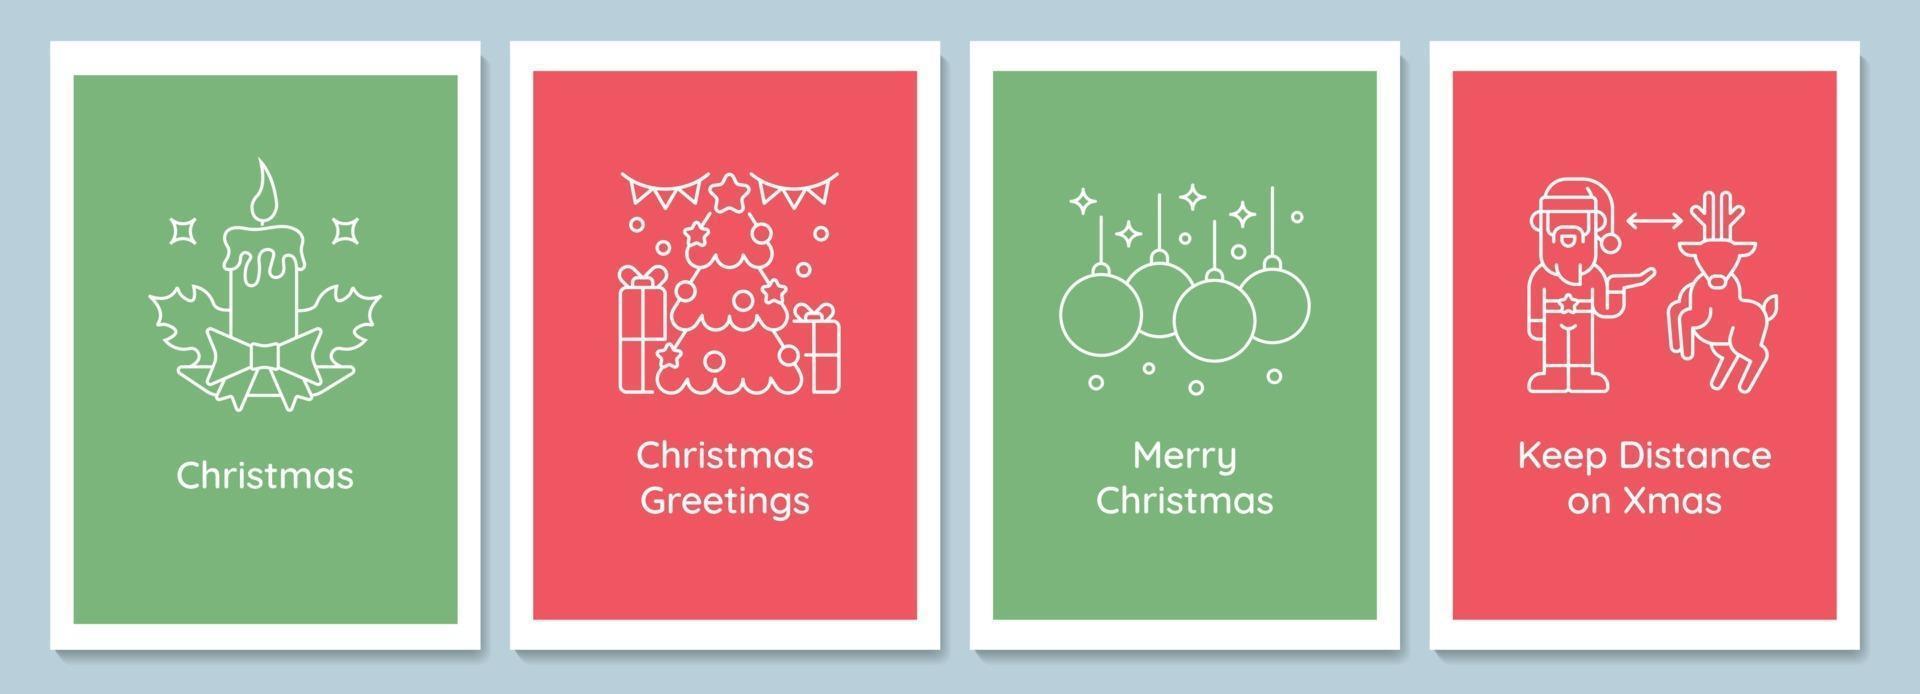 Celebrating Christmas traditions postcards with linear glyph icon set vector